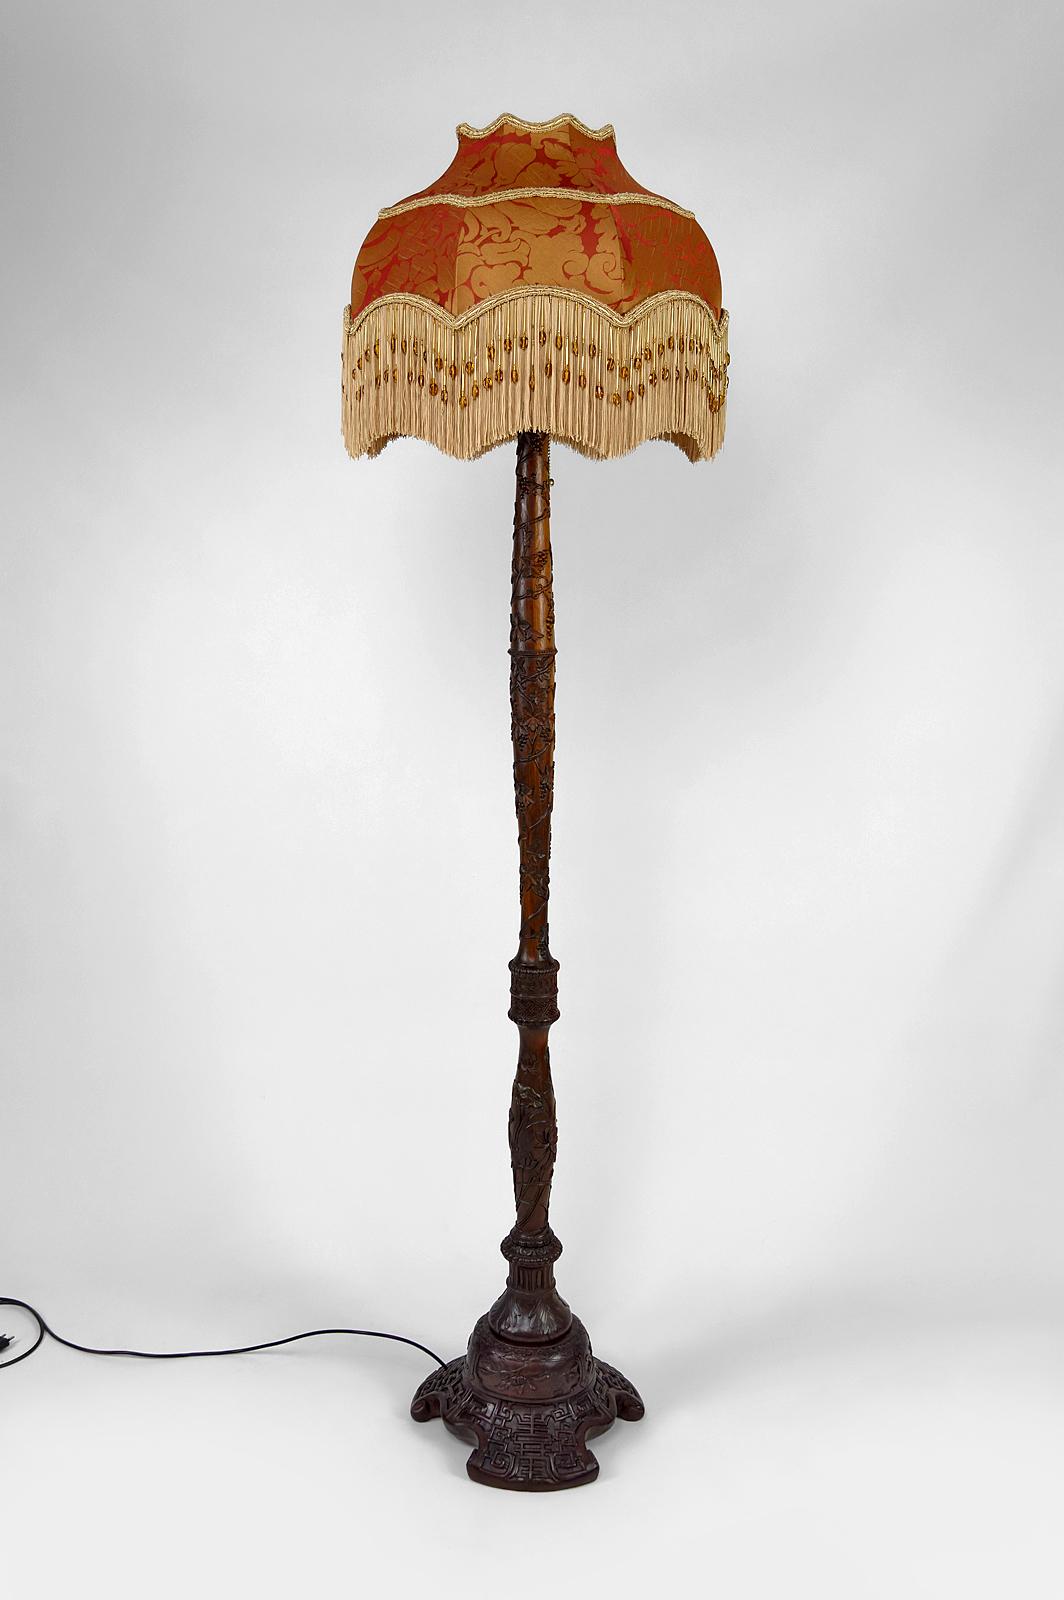 Asian carved wooden floor lamp.
Indochina, circa 1900

In carved wood (Chinese mahogany) with vines, flowers, animals: birds, insects....

Excellent condition.
Restored, electricity redone, new lampshade.

Total dimensions:
height 174cm
diameter 50